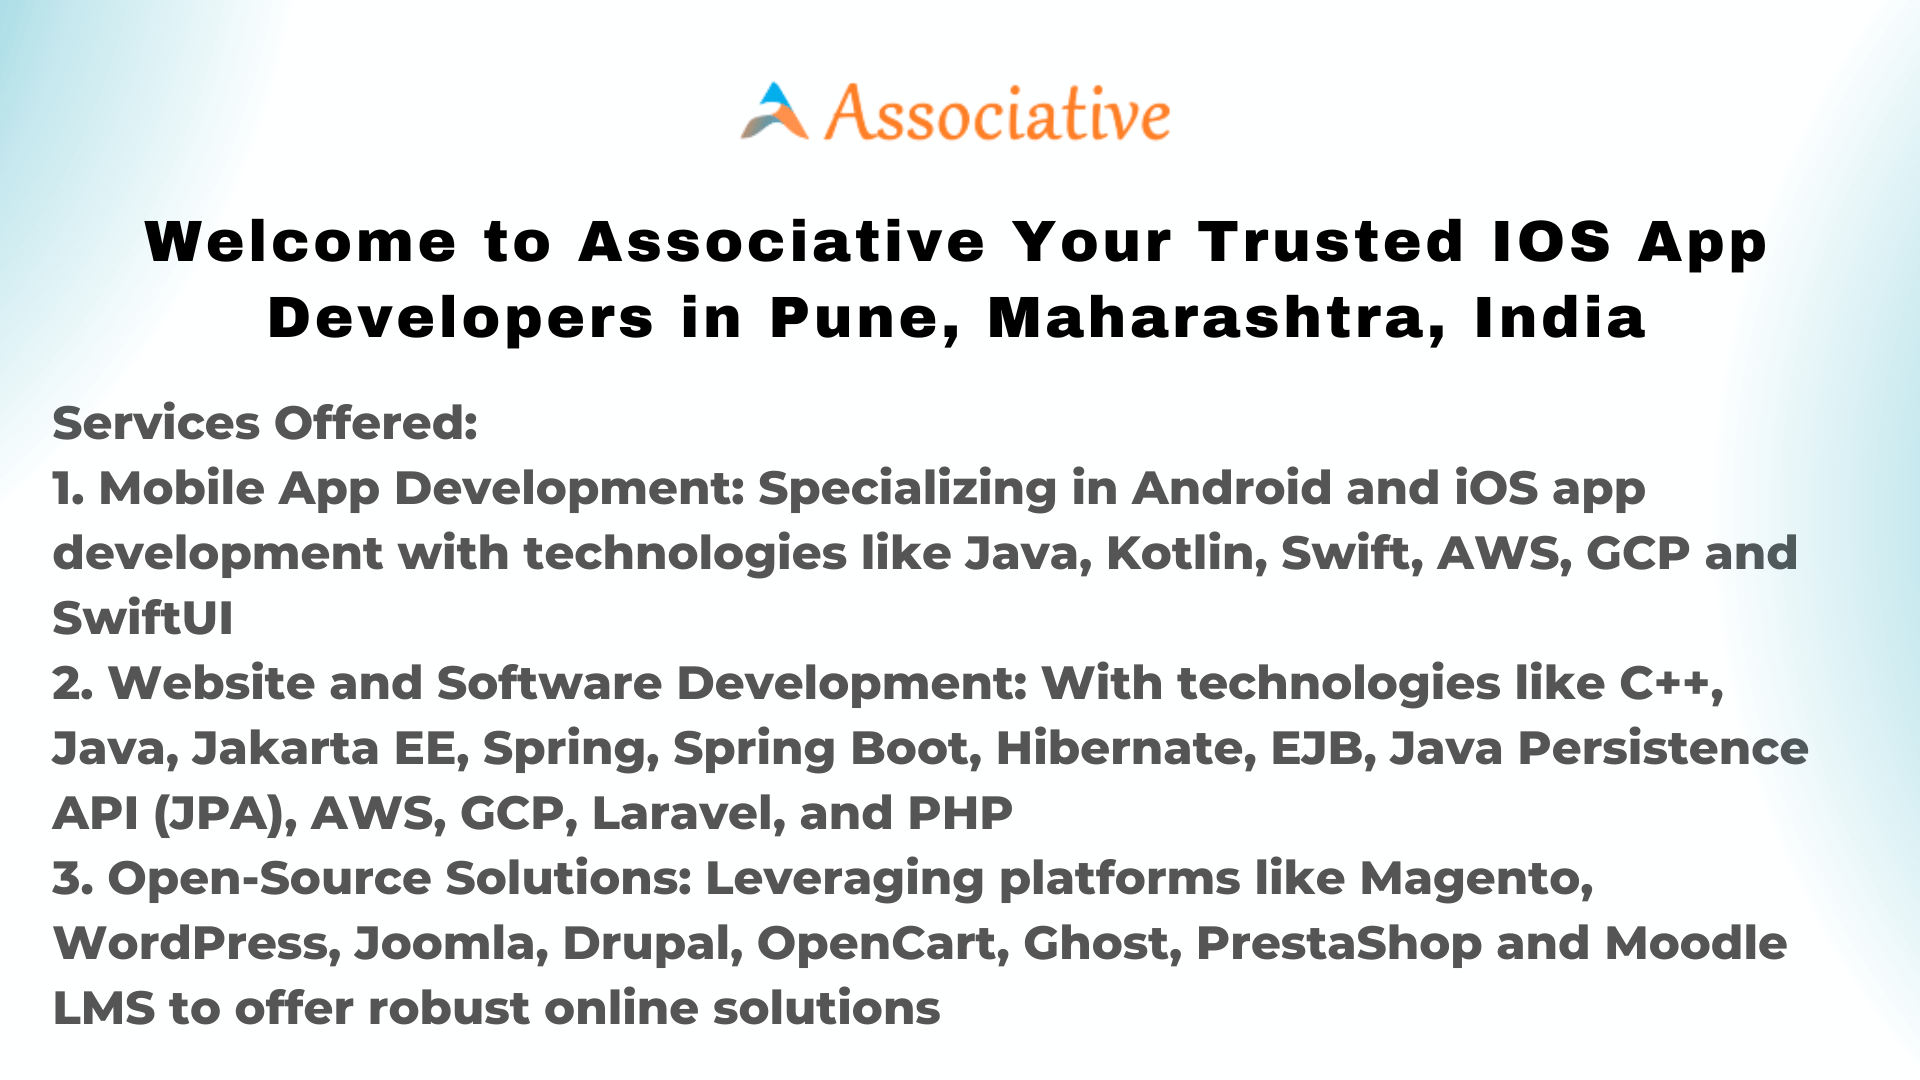 Welcome to Associative Your Trusted iOS App Developers in Pune Maharashtra India